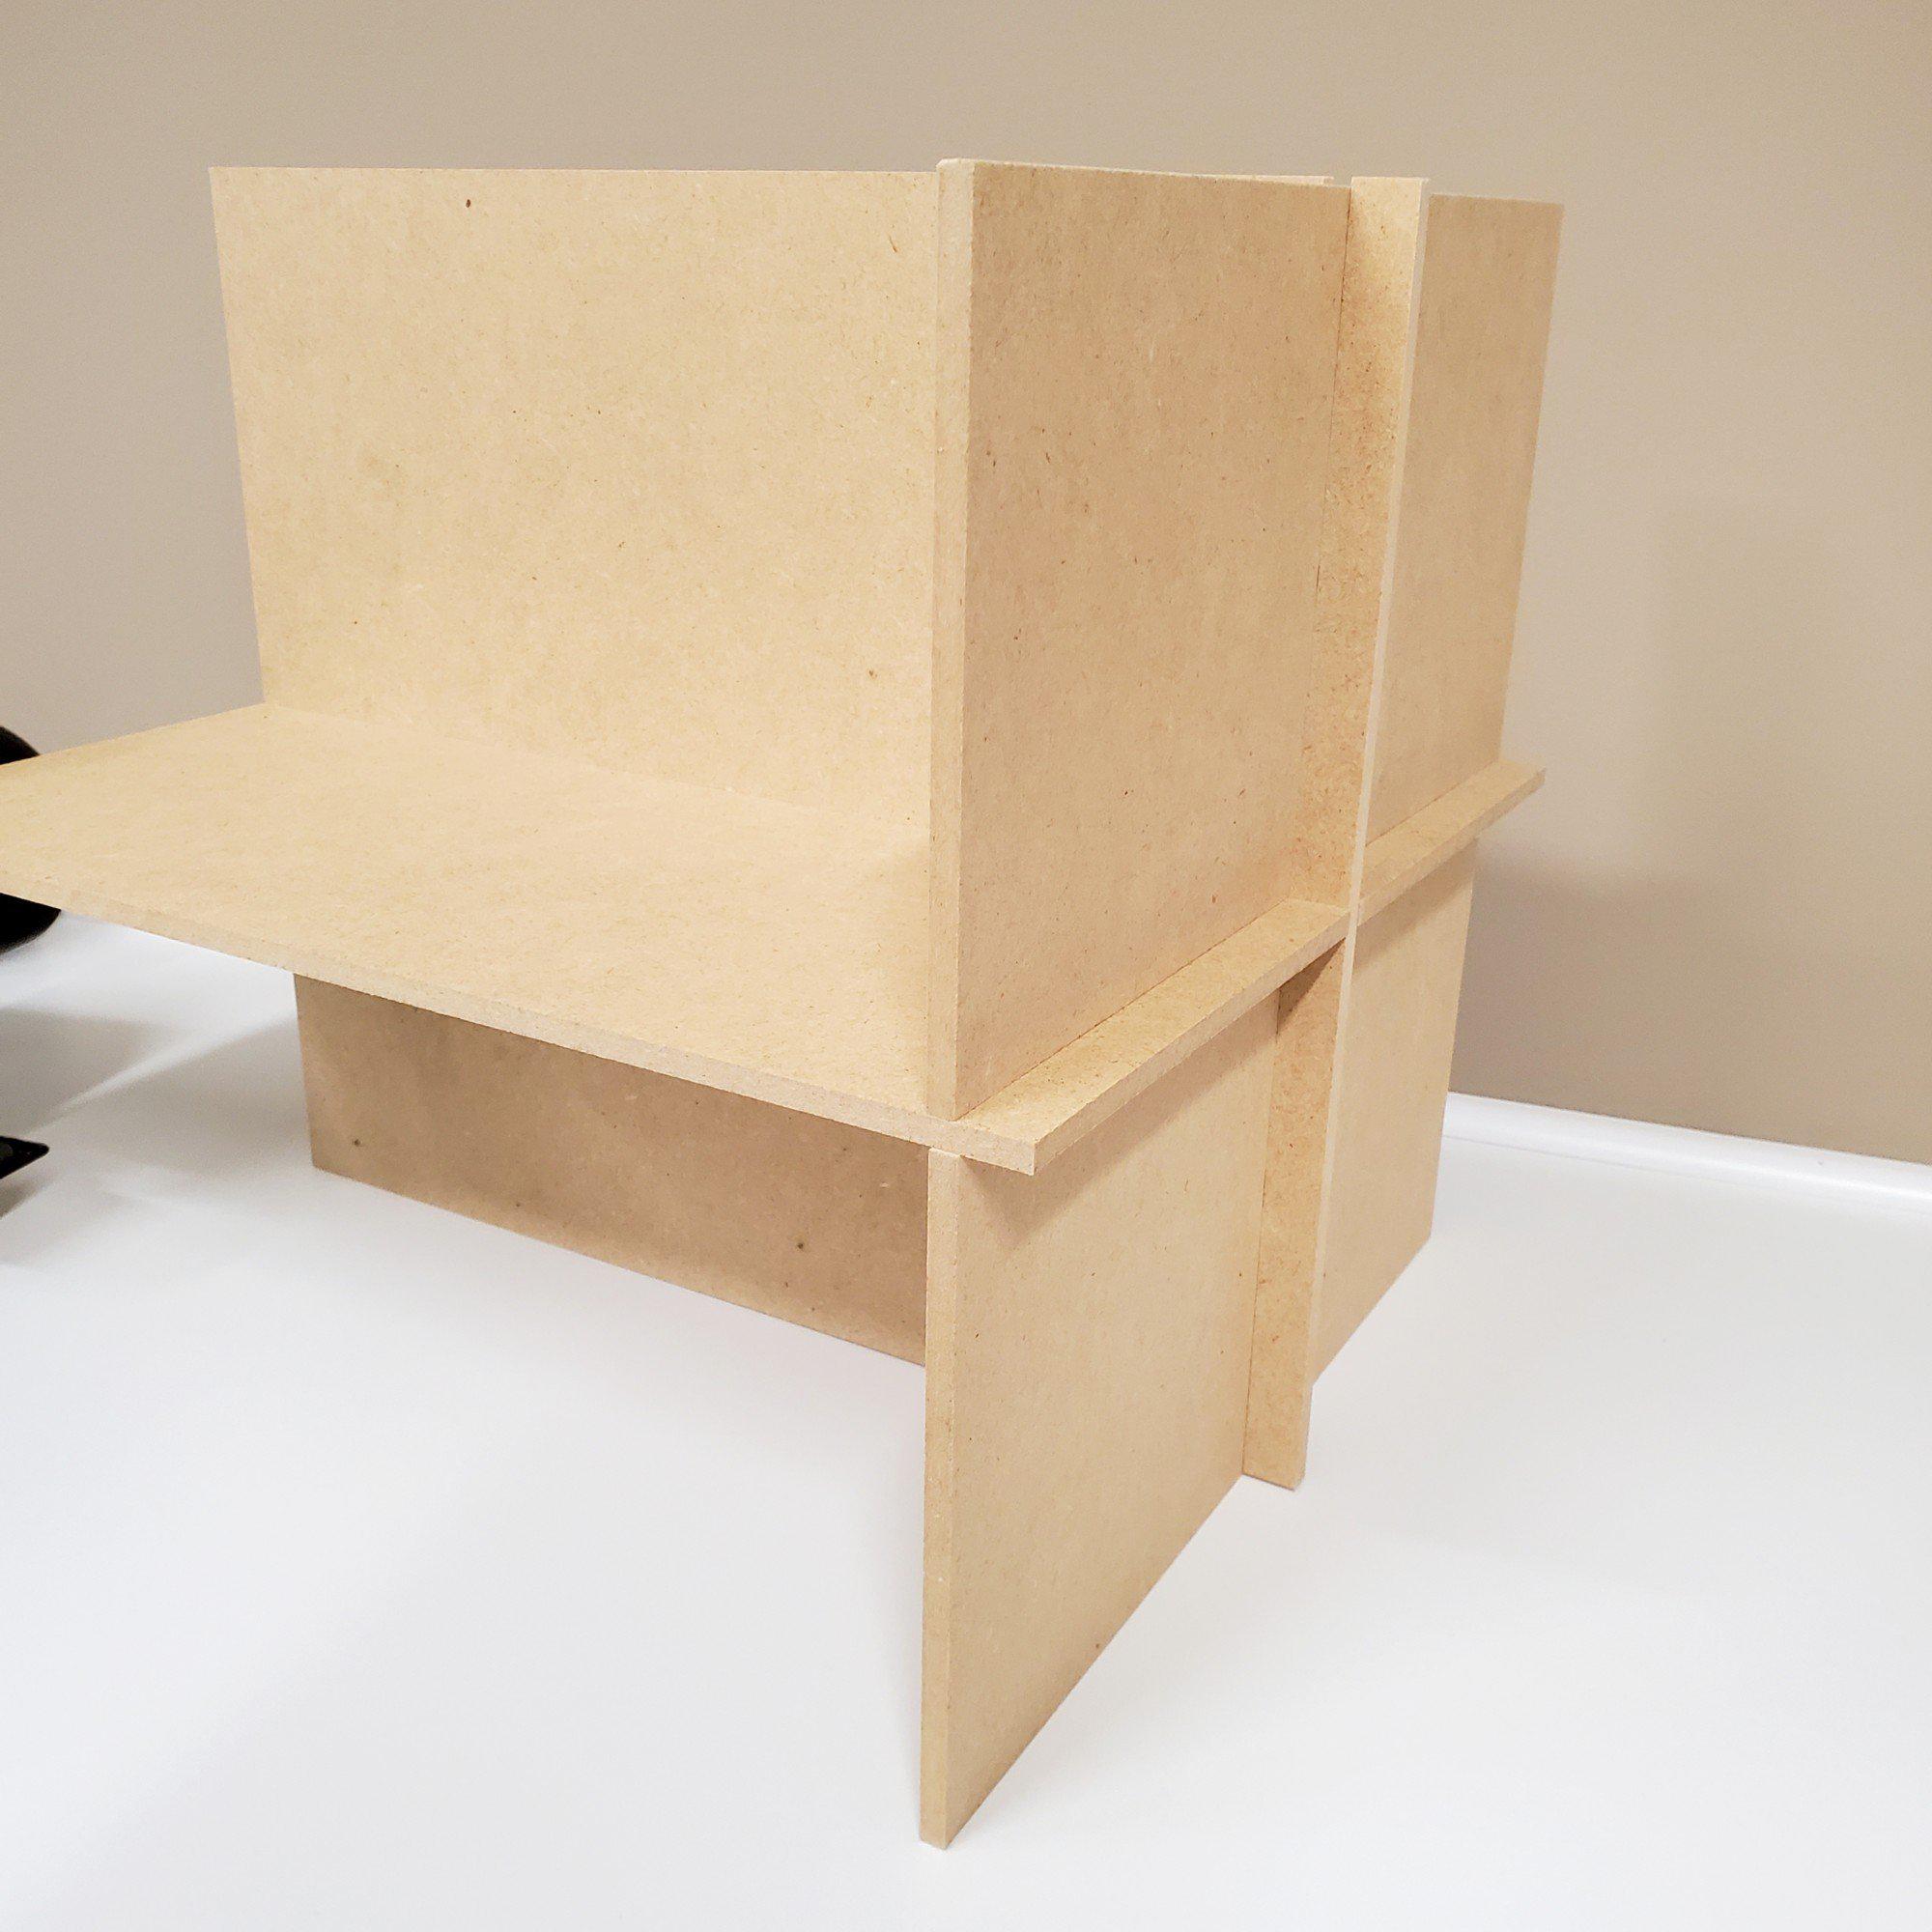 Back view of 4 Cubby Cube Insert for Cube Storage Shelves-The Steady Hand